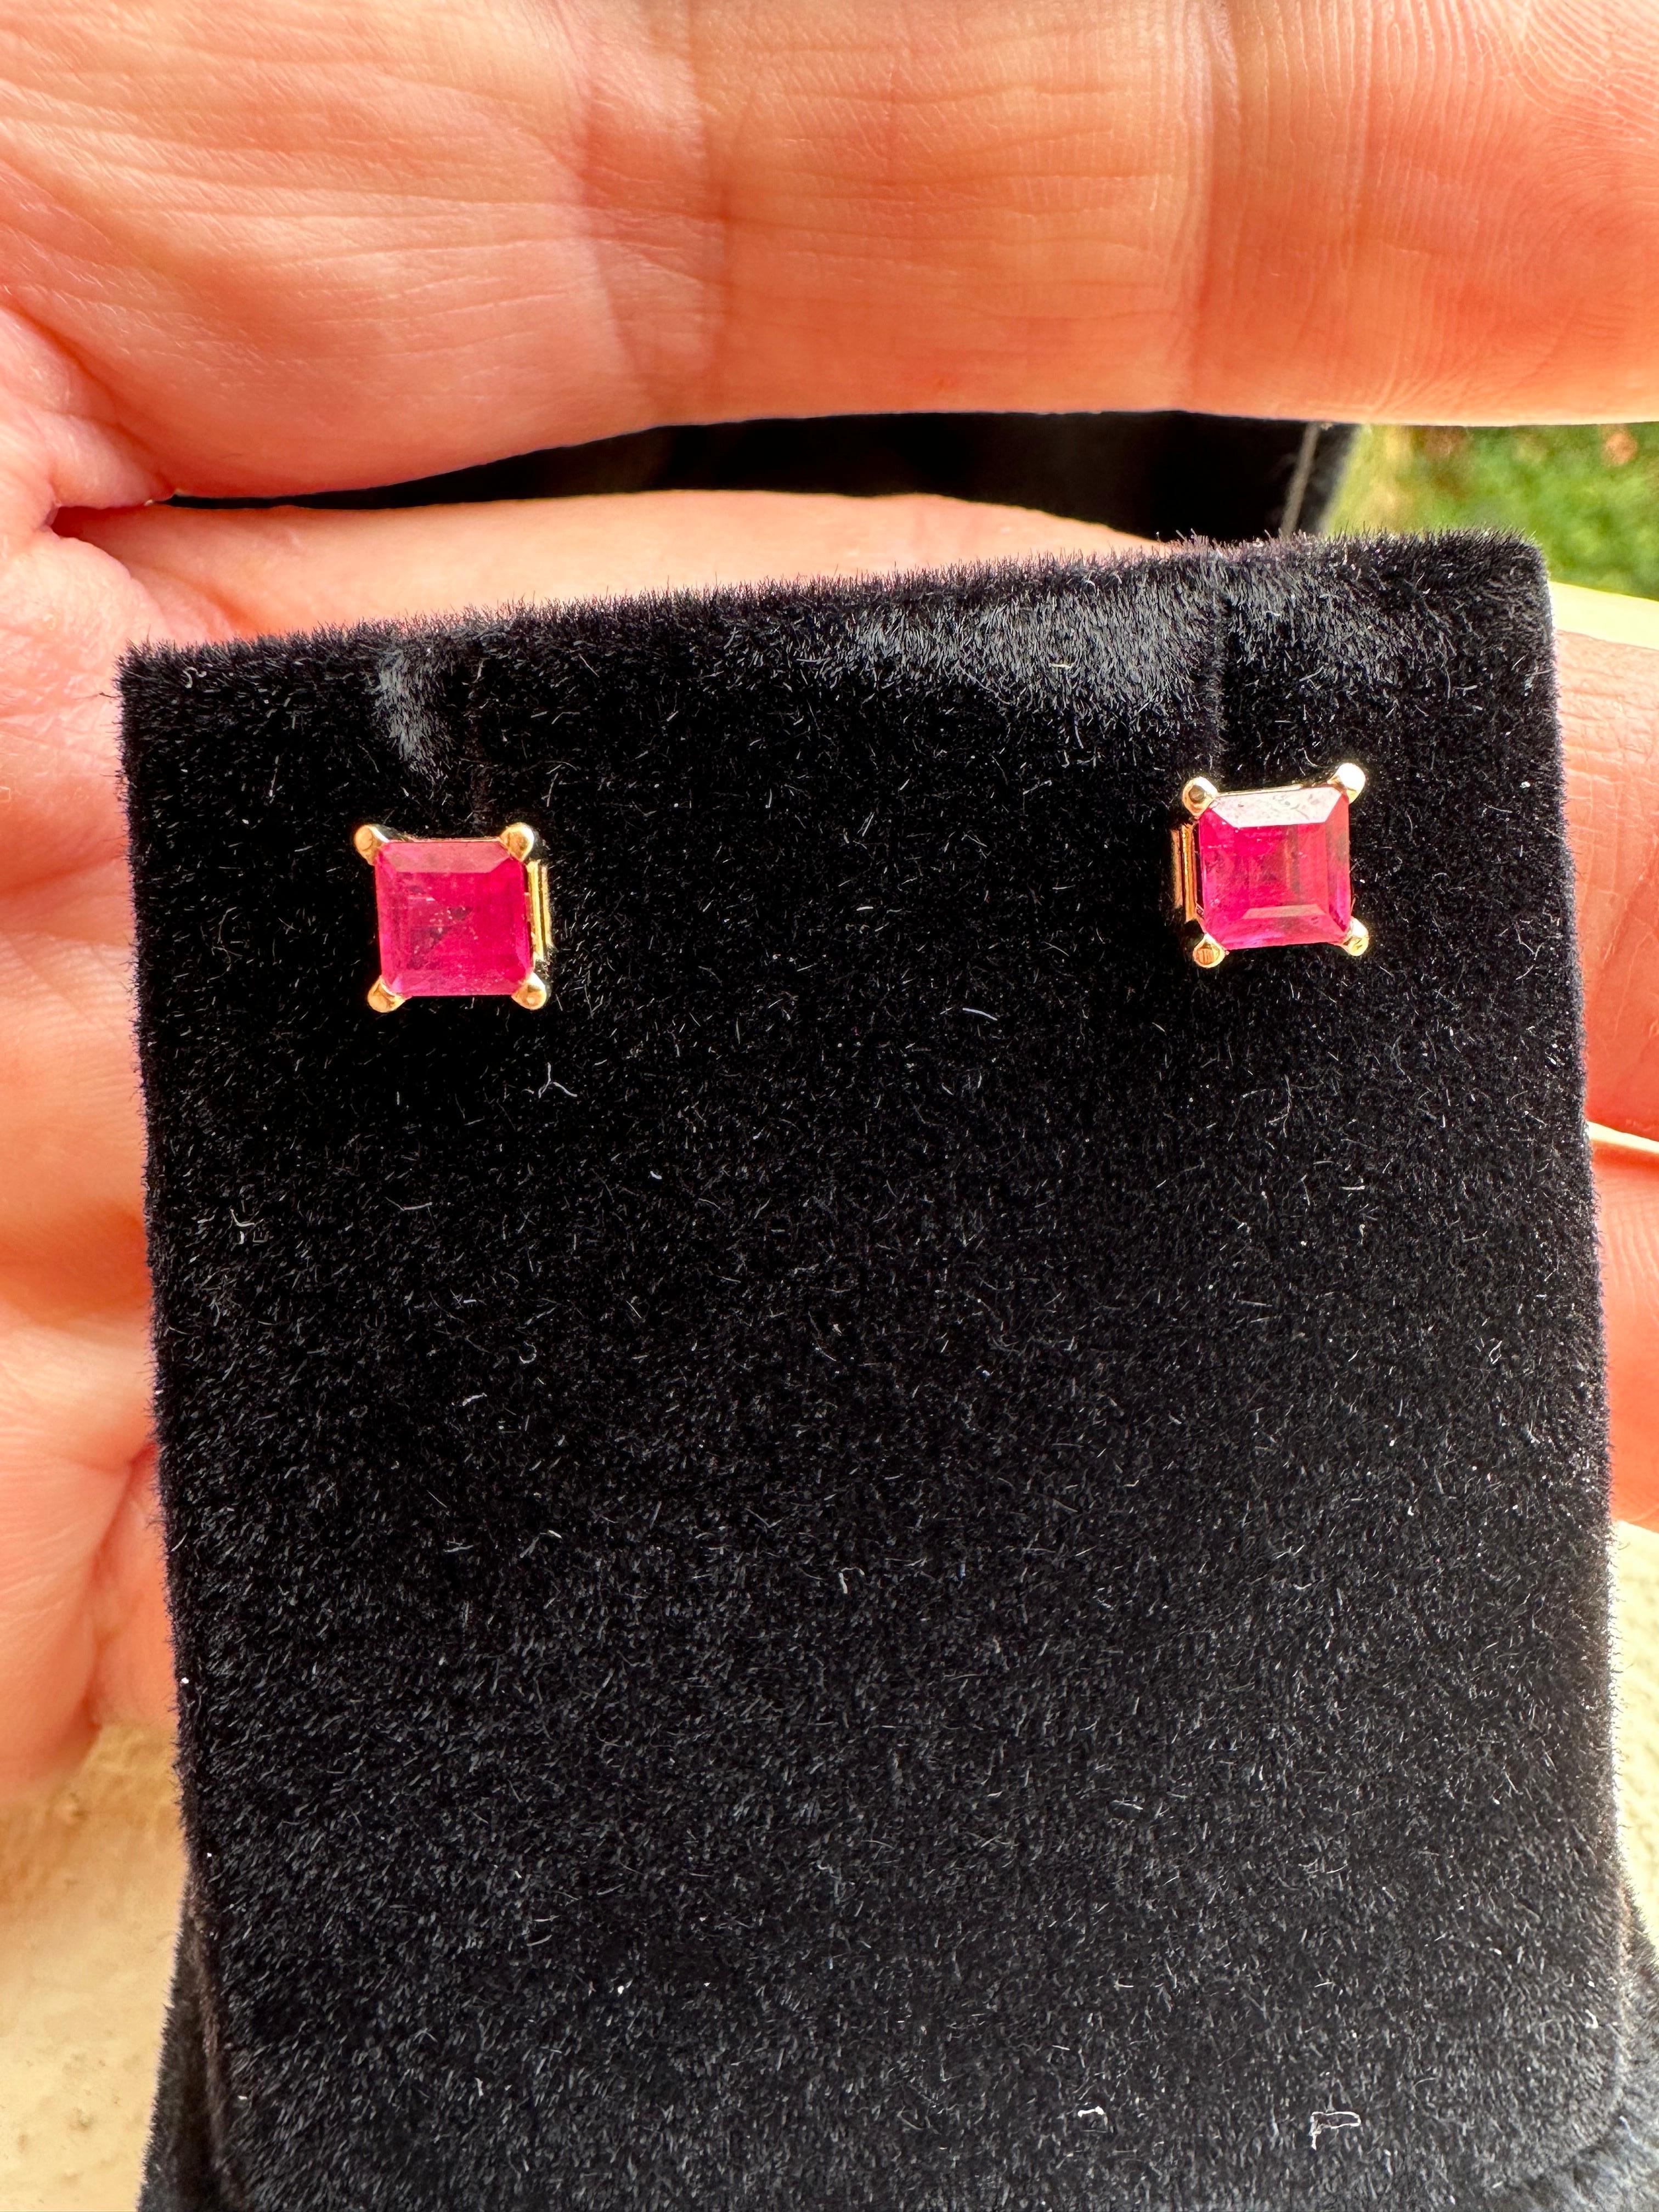 Ruby studs, square cut rubies 100% natural in 14KT gold setting, simple and elegant!


Certificate of authenticity comes with purchase!

ABOUT US
We are a family-owned business. Our studio in located in the heart of Boca Raton at the International